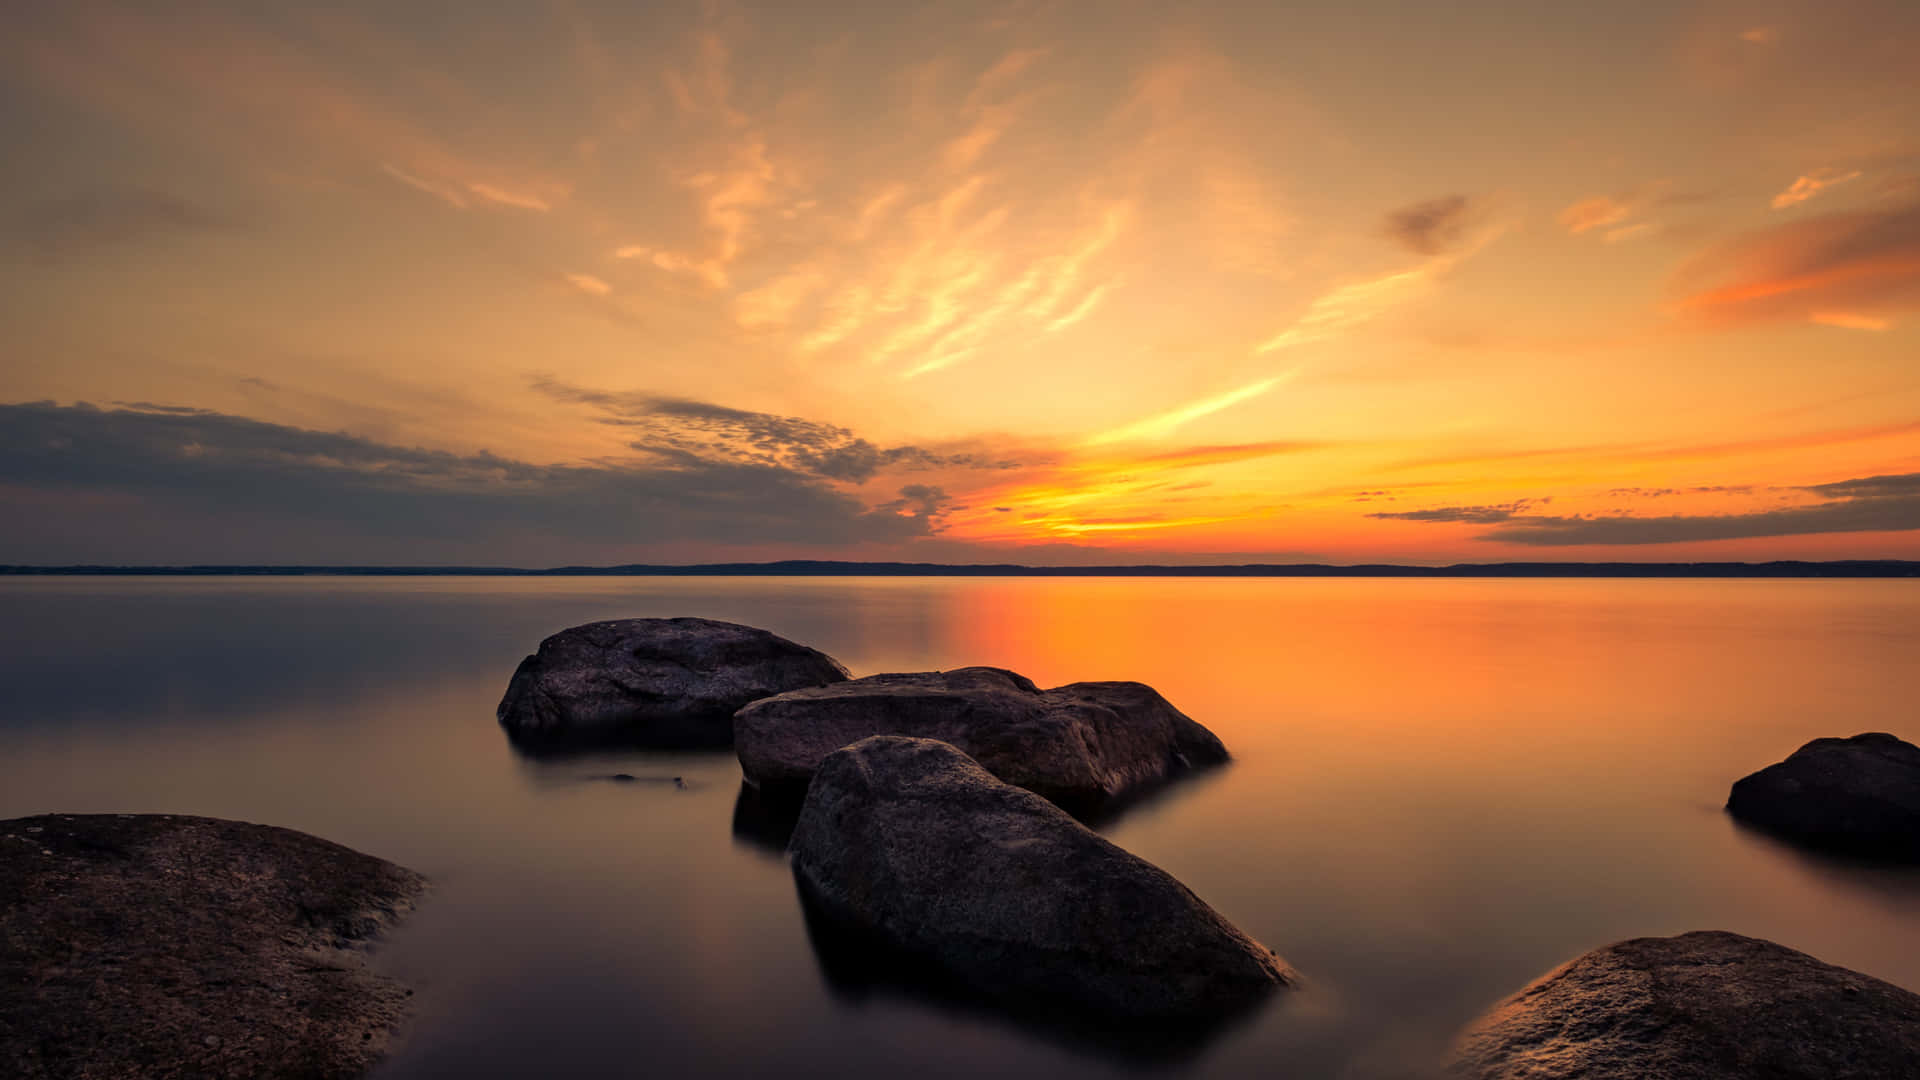 A Sunset With Rocks And Water In The Background